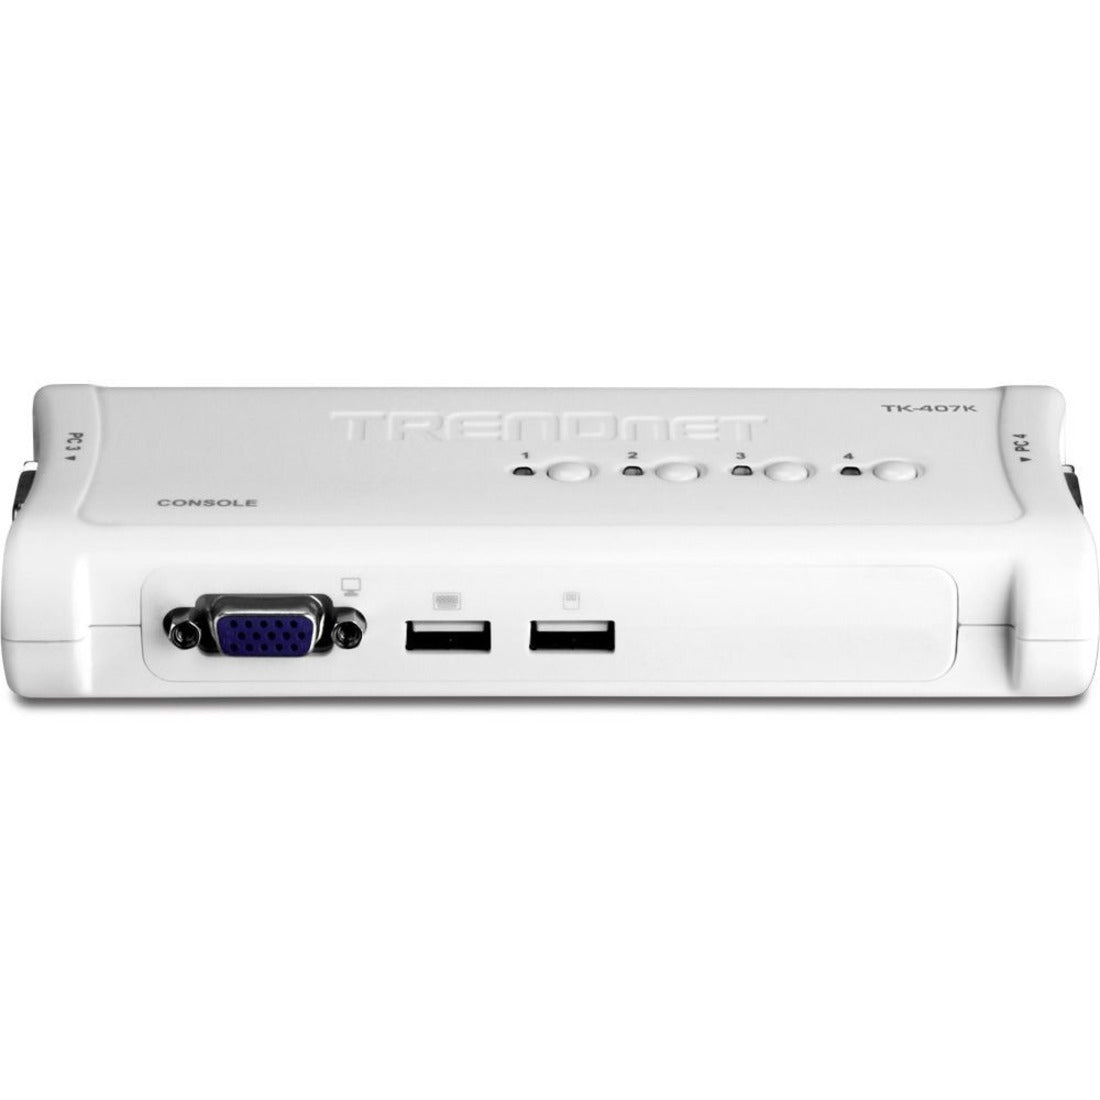 TRENDnet 4-Port USB KVM Switch Kit, VGA And USB Connections, 2048 x 1536 Resolution, Cabling Included, Control Up To 4 Computers, Compliant With Window, Linux, and Mac OS, White, TK-407K (TK-407K) Front image